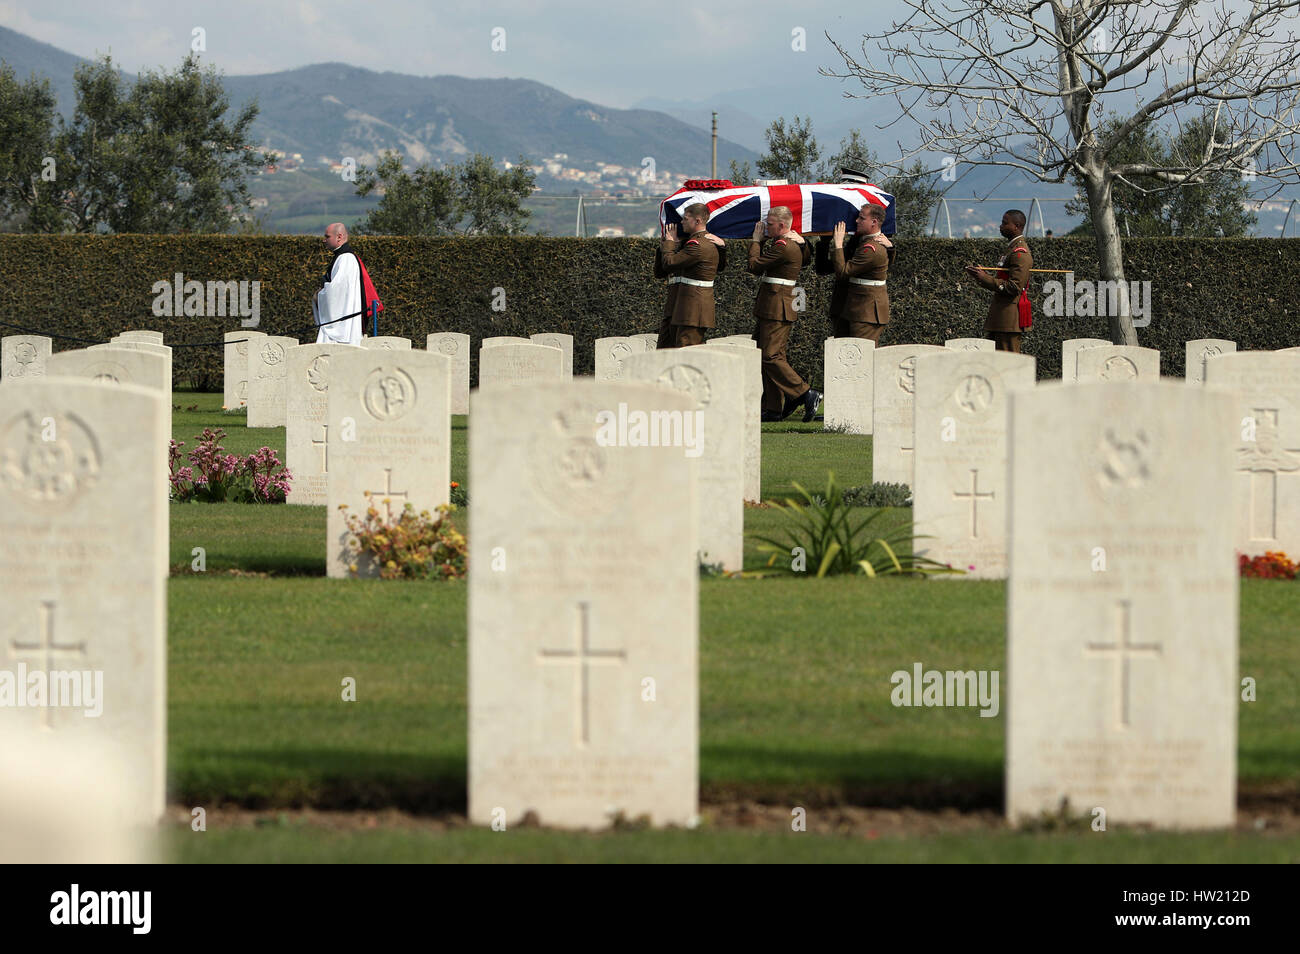 The coffin of an unknown soldier is carried in during the burial service for Lance Corporal Ronald George Blackham from Northwich, Cheshire and two unknown soldiers at the Commonwealth War Graves Commission (CWGC) Salerno War Cemetery, in Italy, who were all killed in WWII, during a fierce battle on 25 September 1943 on Hill 270, near the village of Capezzano. Stock Photo